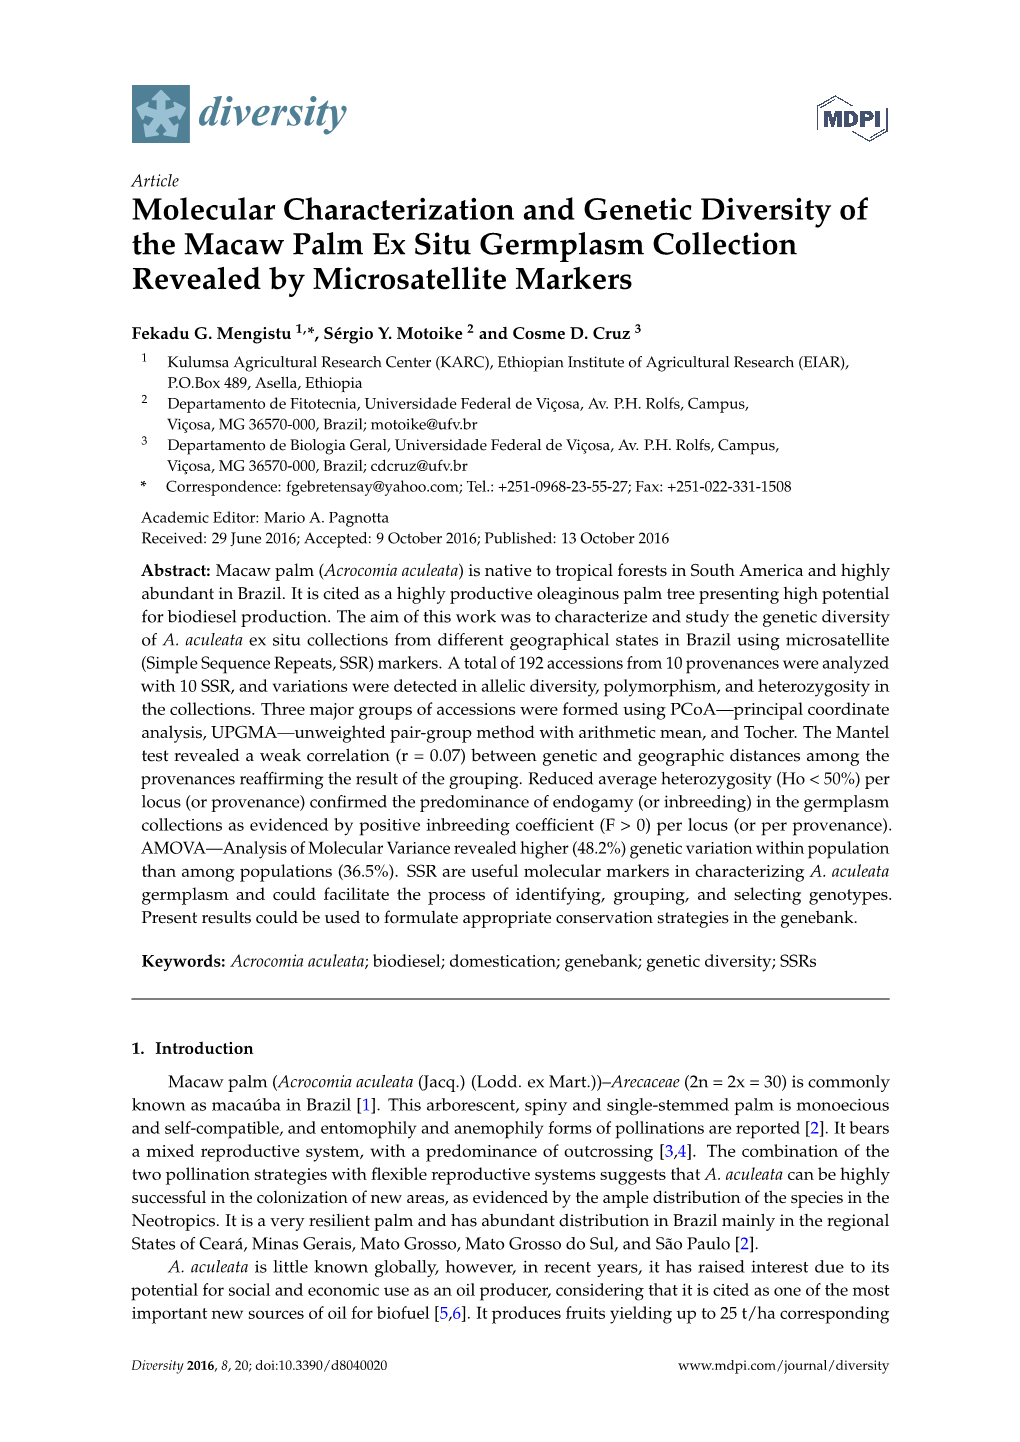 Molecular Characterization and Genetic Diversity of the Macaw Palm Ex Situ Germplasm Collection Revealed by Microsatellite Markers